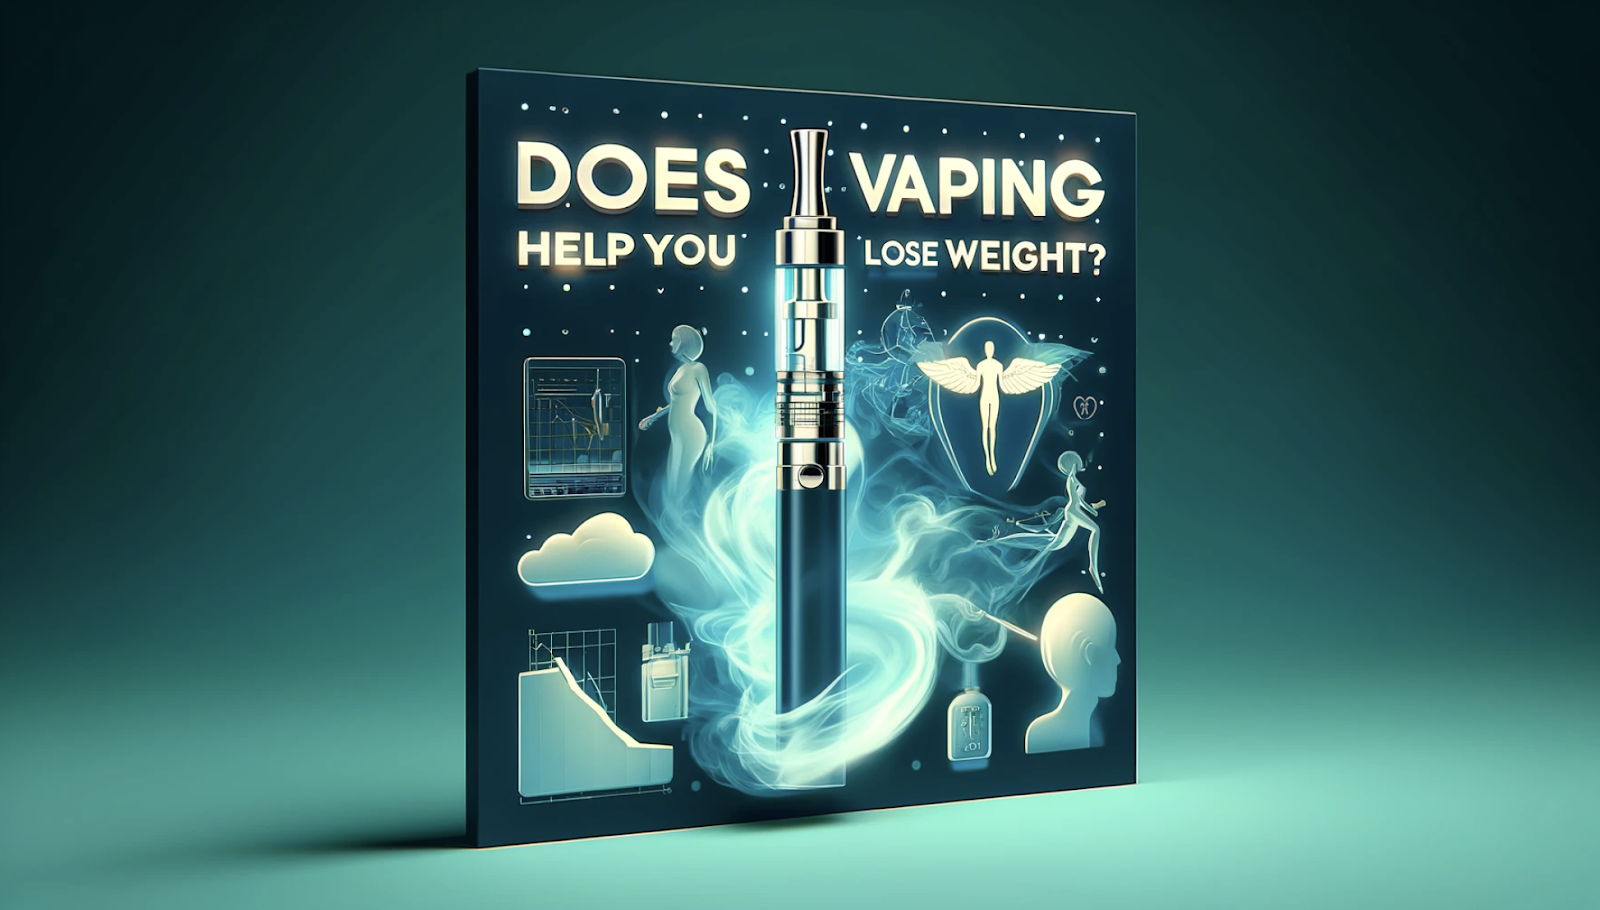 Does vaping help you lose weight?